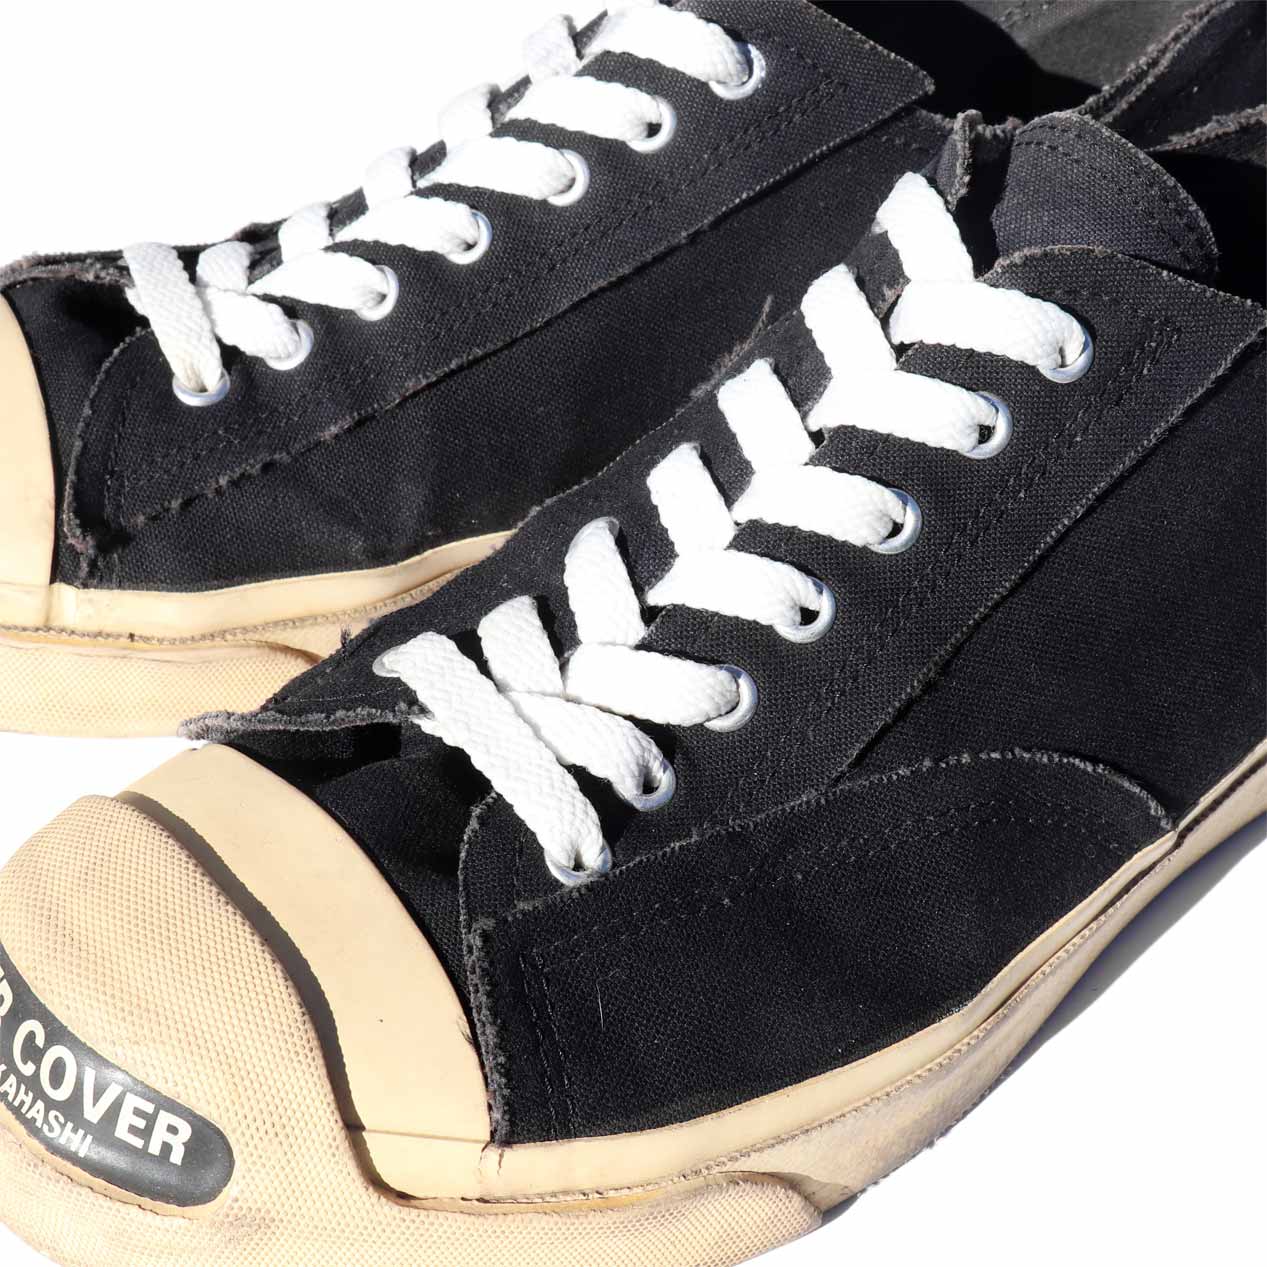 POST JUNK / '06 UNDERCOVER Jack Purcell Black Canvas [28cm]